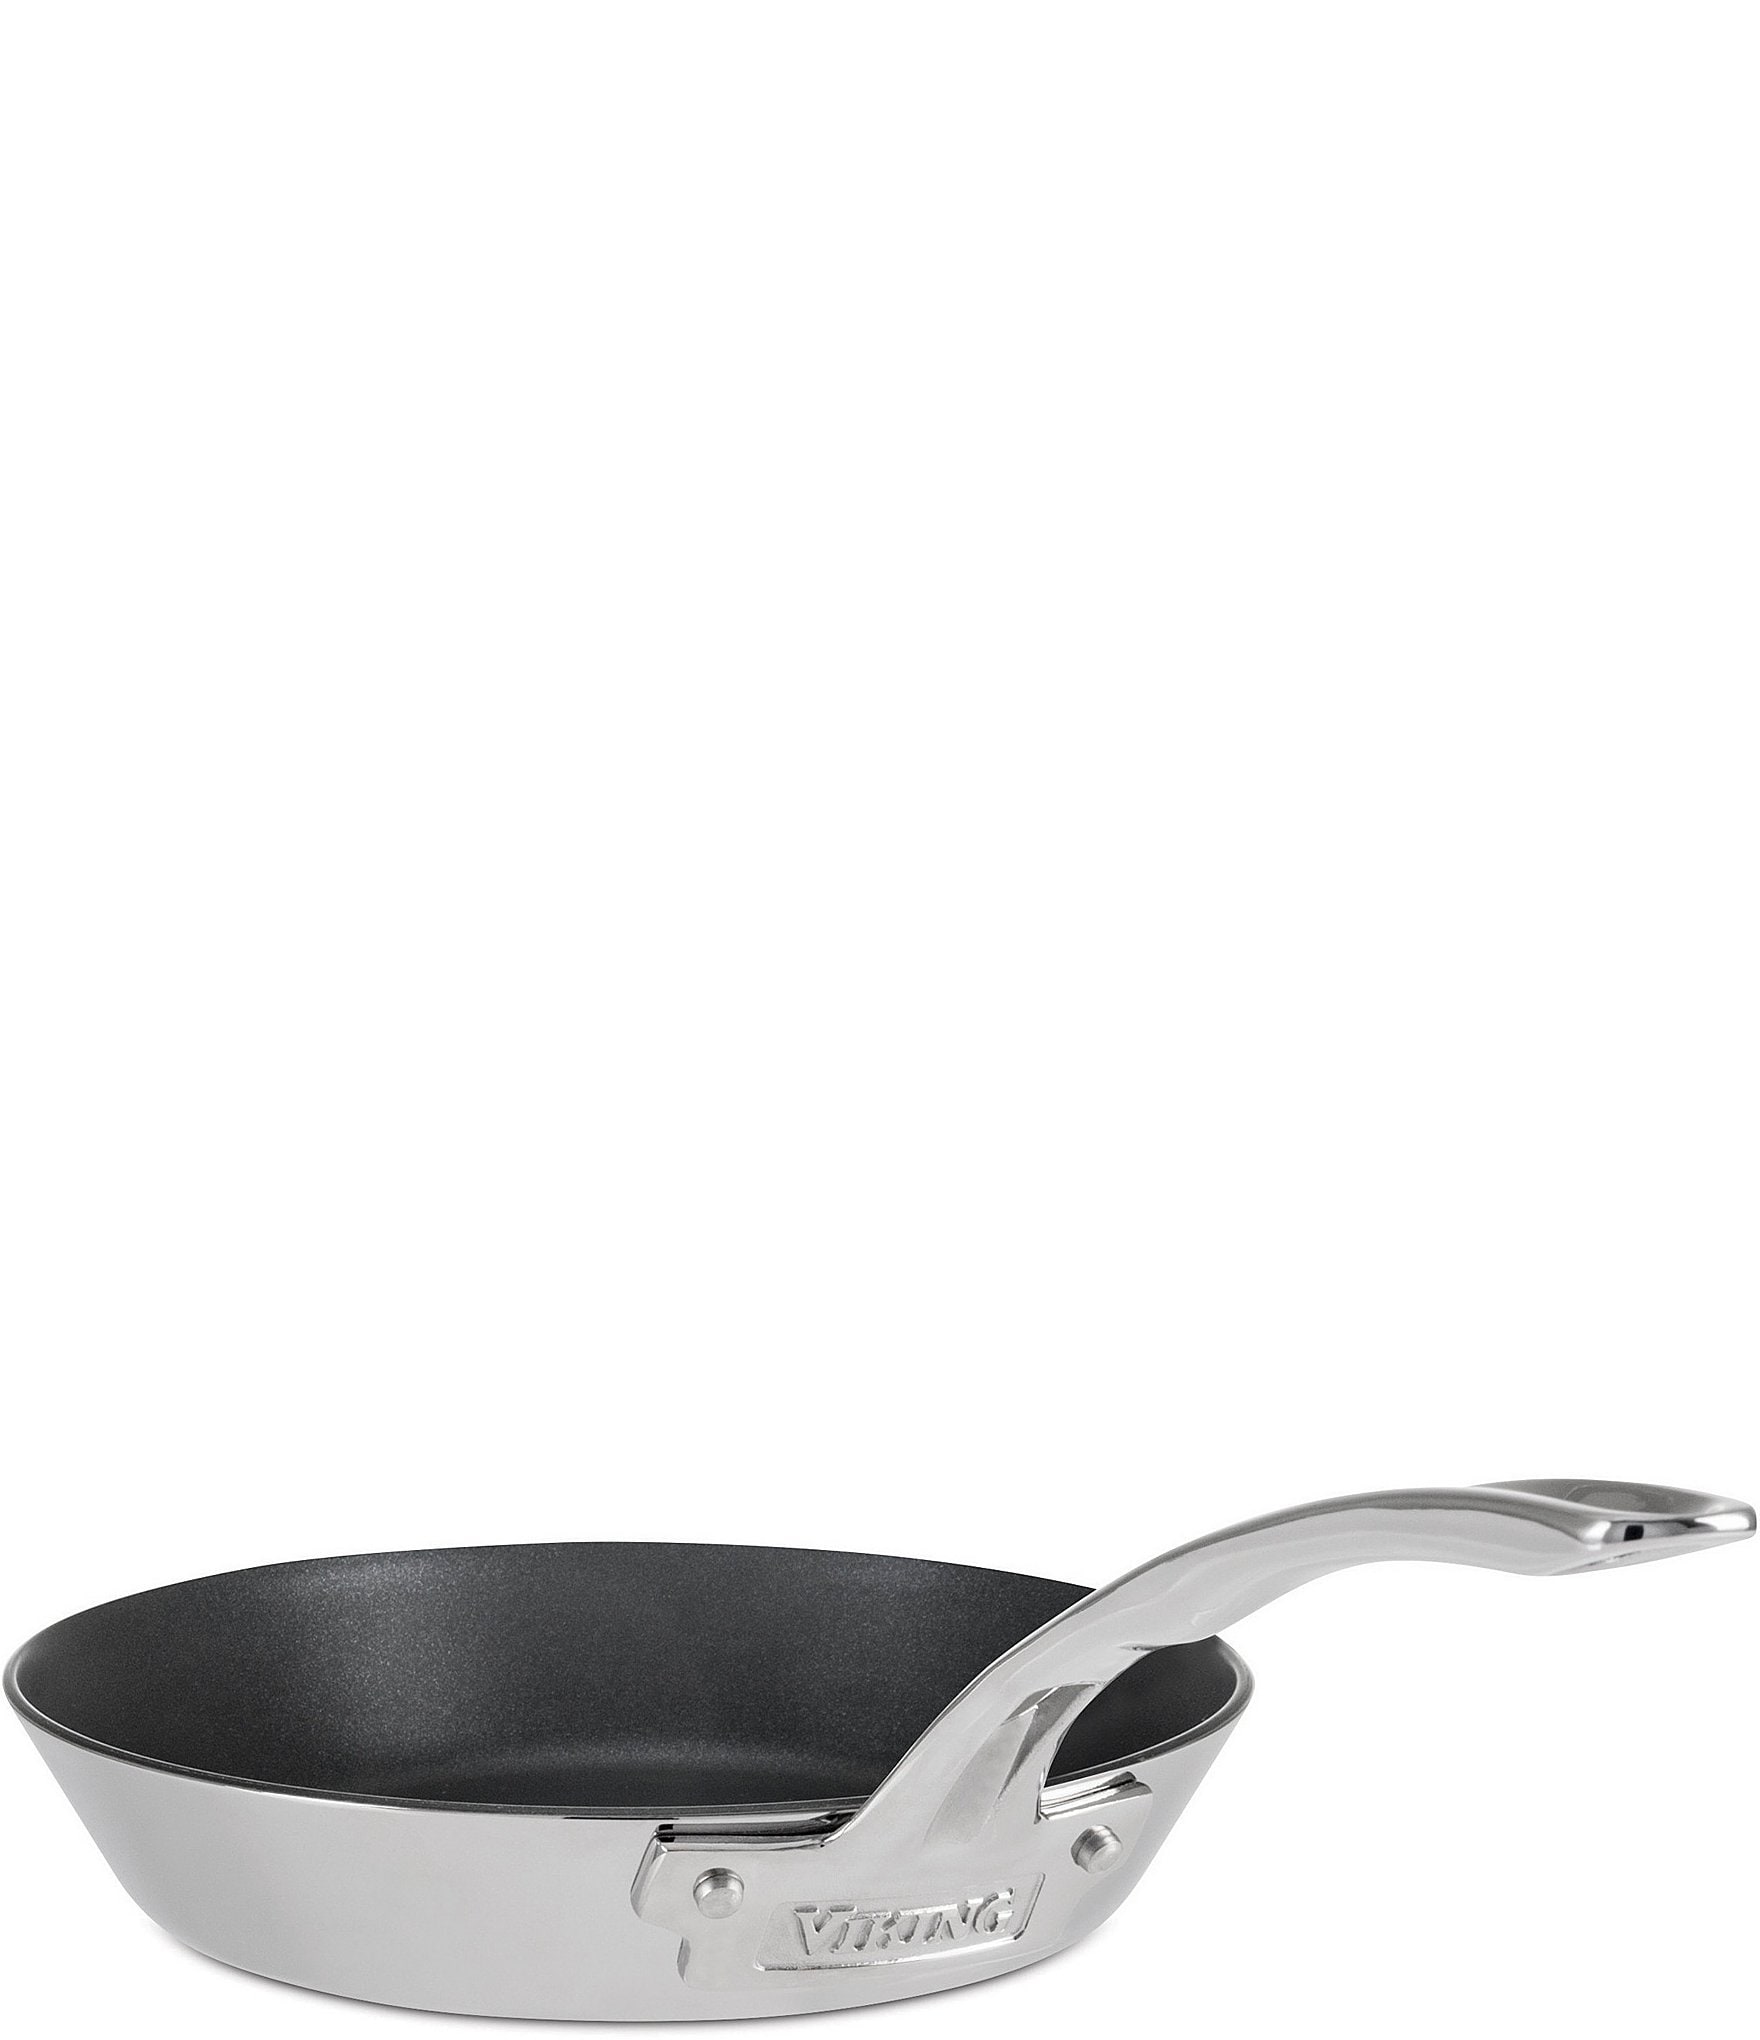 https://dimg.dillards.com/is/image/DillardsZoom/zoom/viking-contemporary-3-ply-stainless-steel-enterna-nonstick-fry-pan/00000000_zi_e9fe50d0-e591-47e8-9c58-6ca5466bf7c1.jpg